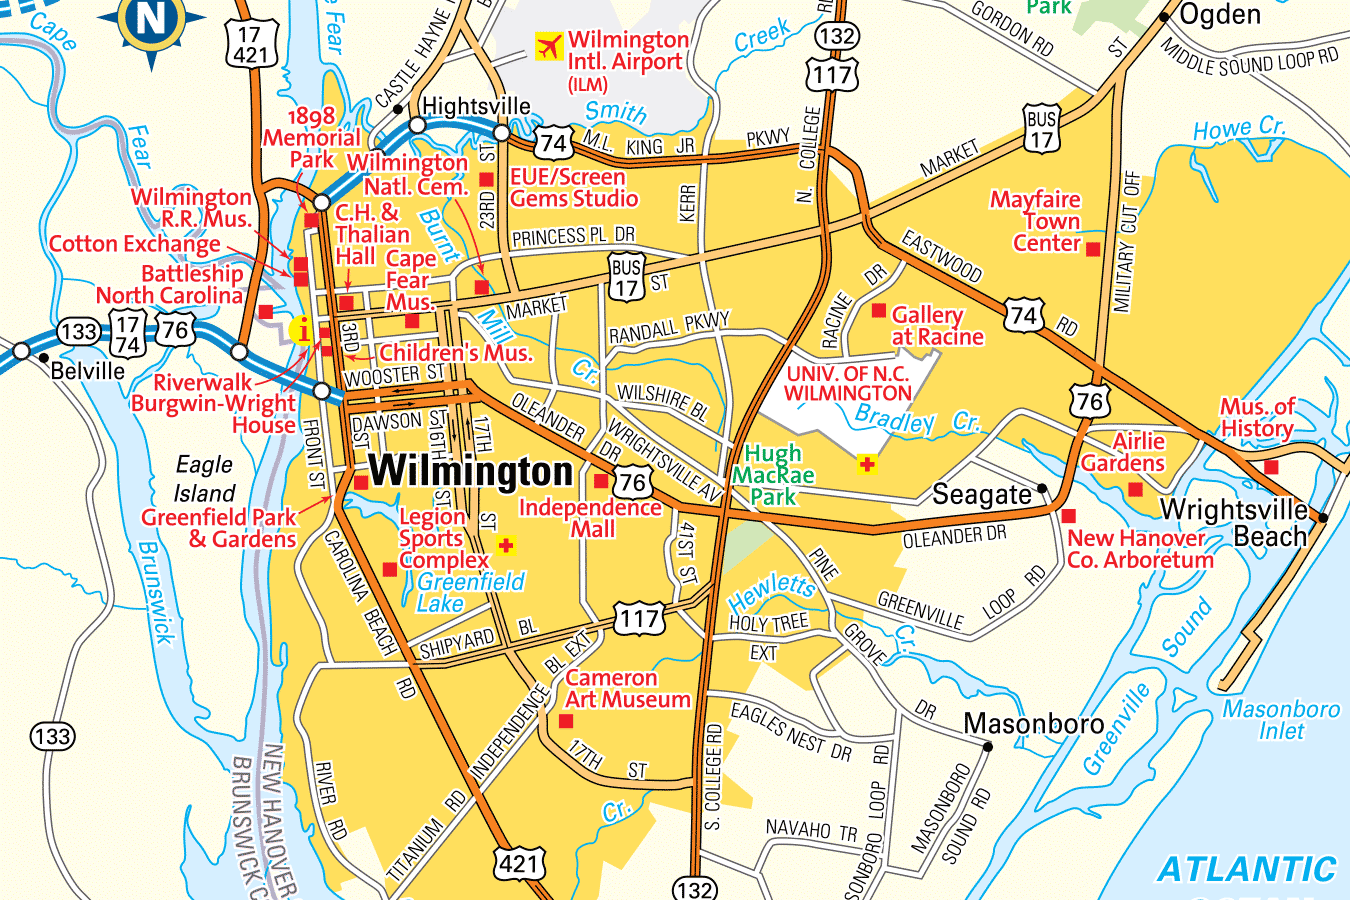 Wilmington, NC is a bound by the Cape Fear to the west and the Intracoastal Waterway to the East.